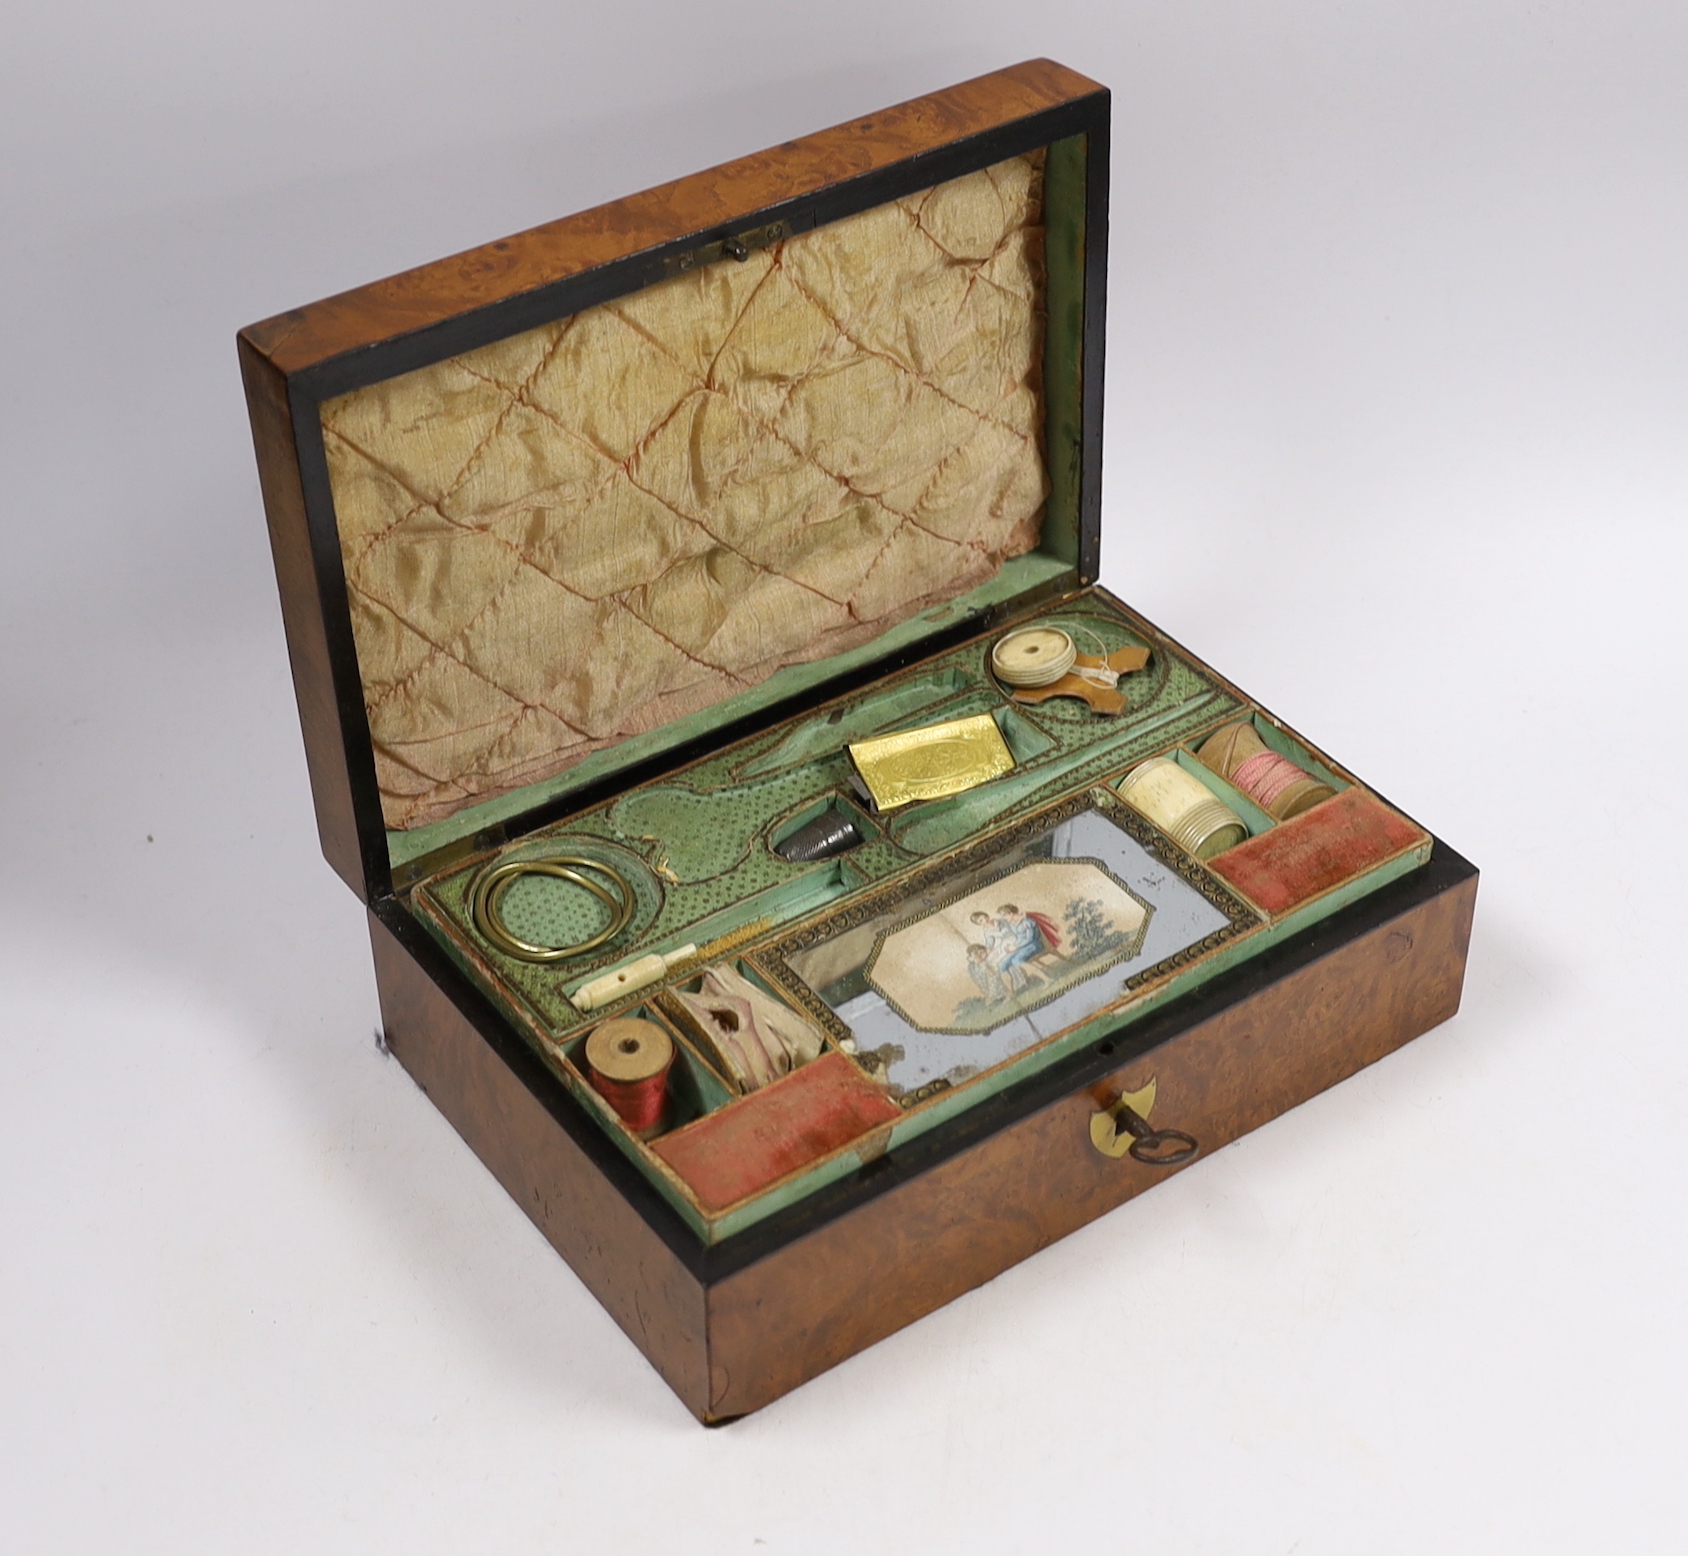 An early 19th century French bird's-eye maple and a walnut sewing box containing some sewing accessories, 24 x 16 x 8cm